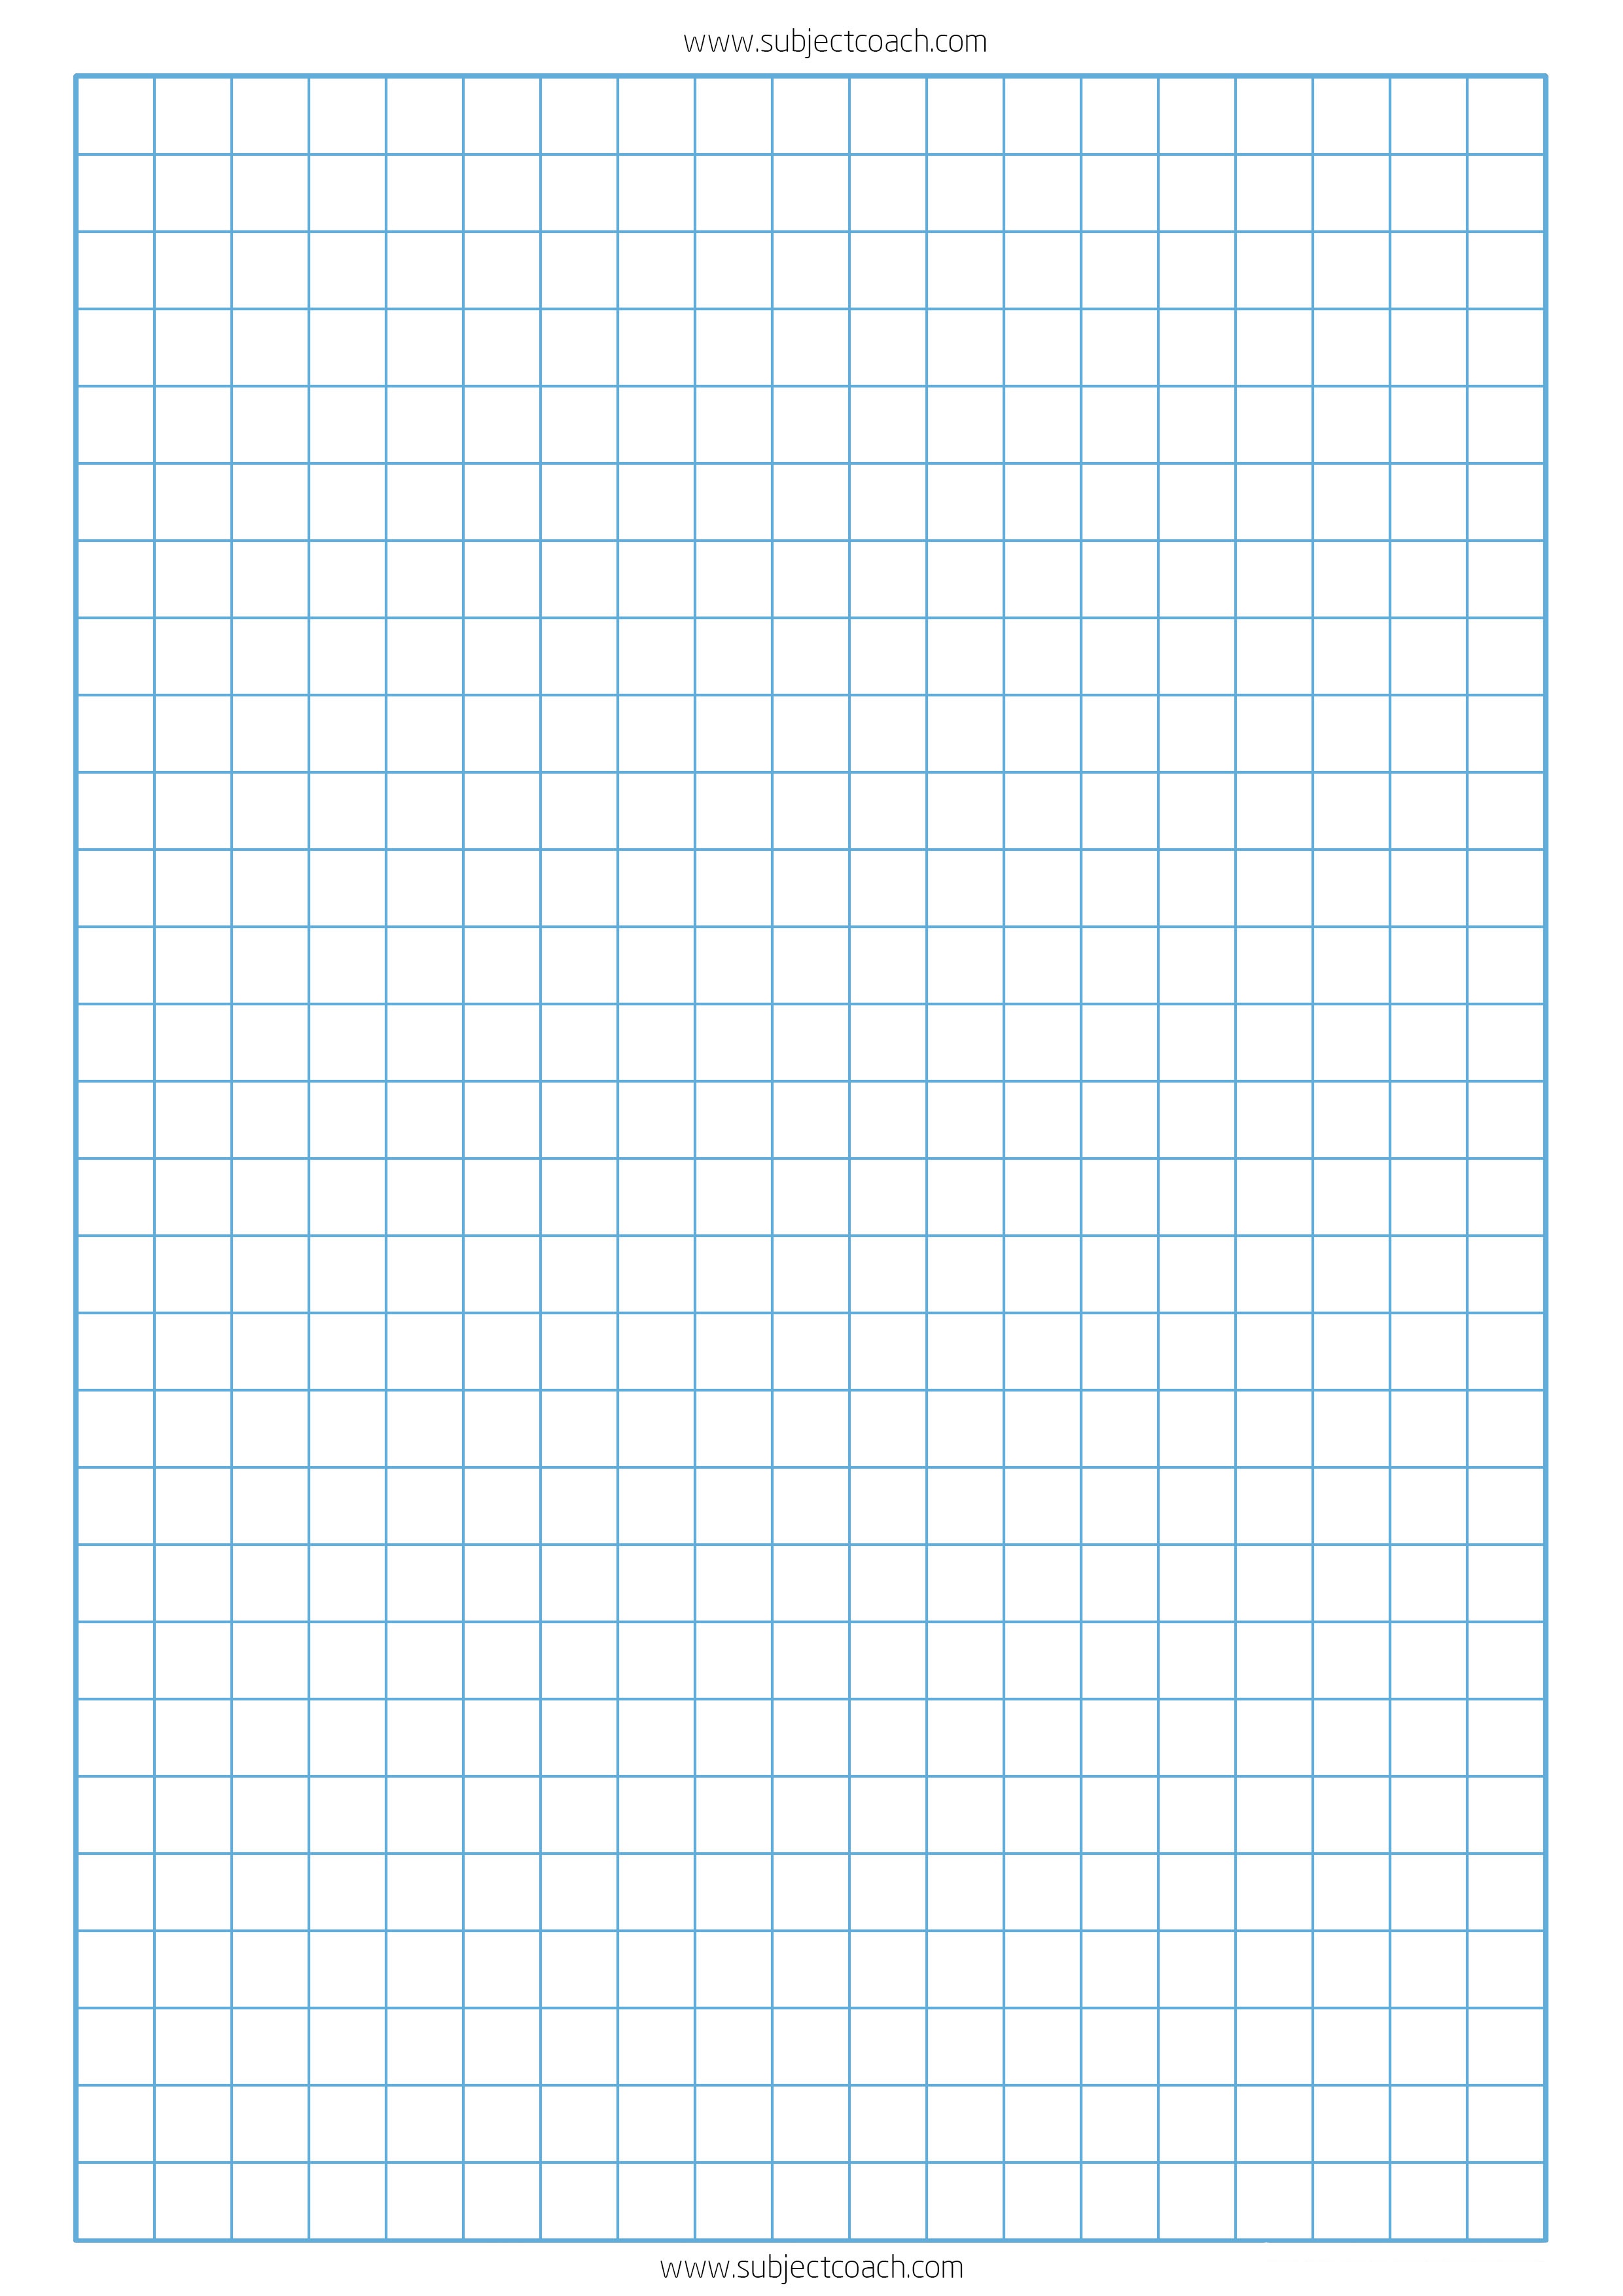 Free Printable Graph Paper 1Cm For A4 Paper | Subjectcoach - Free Printable Grid Paper